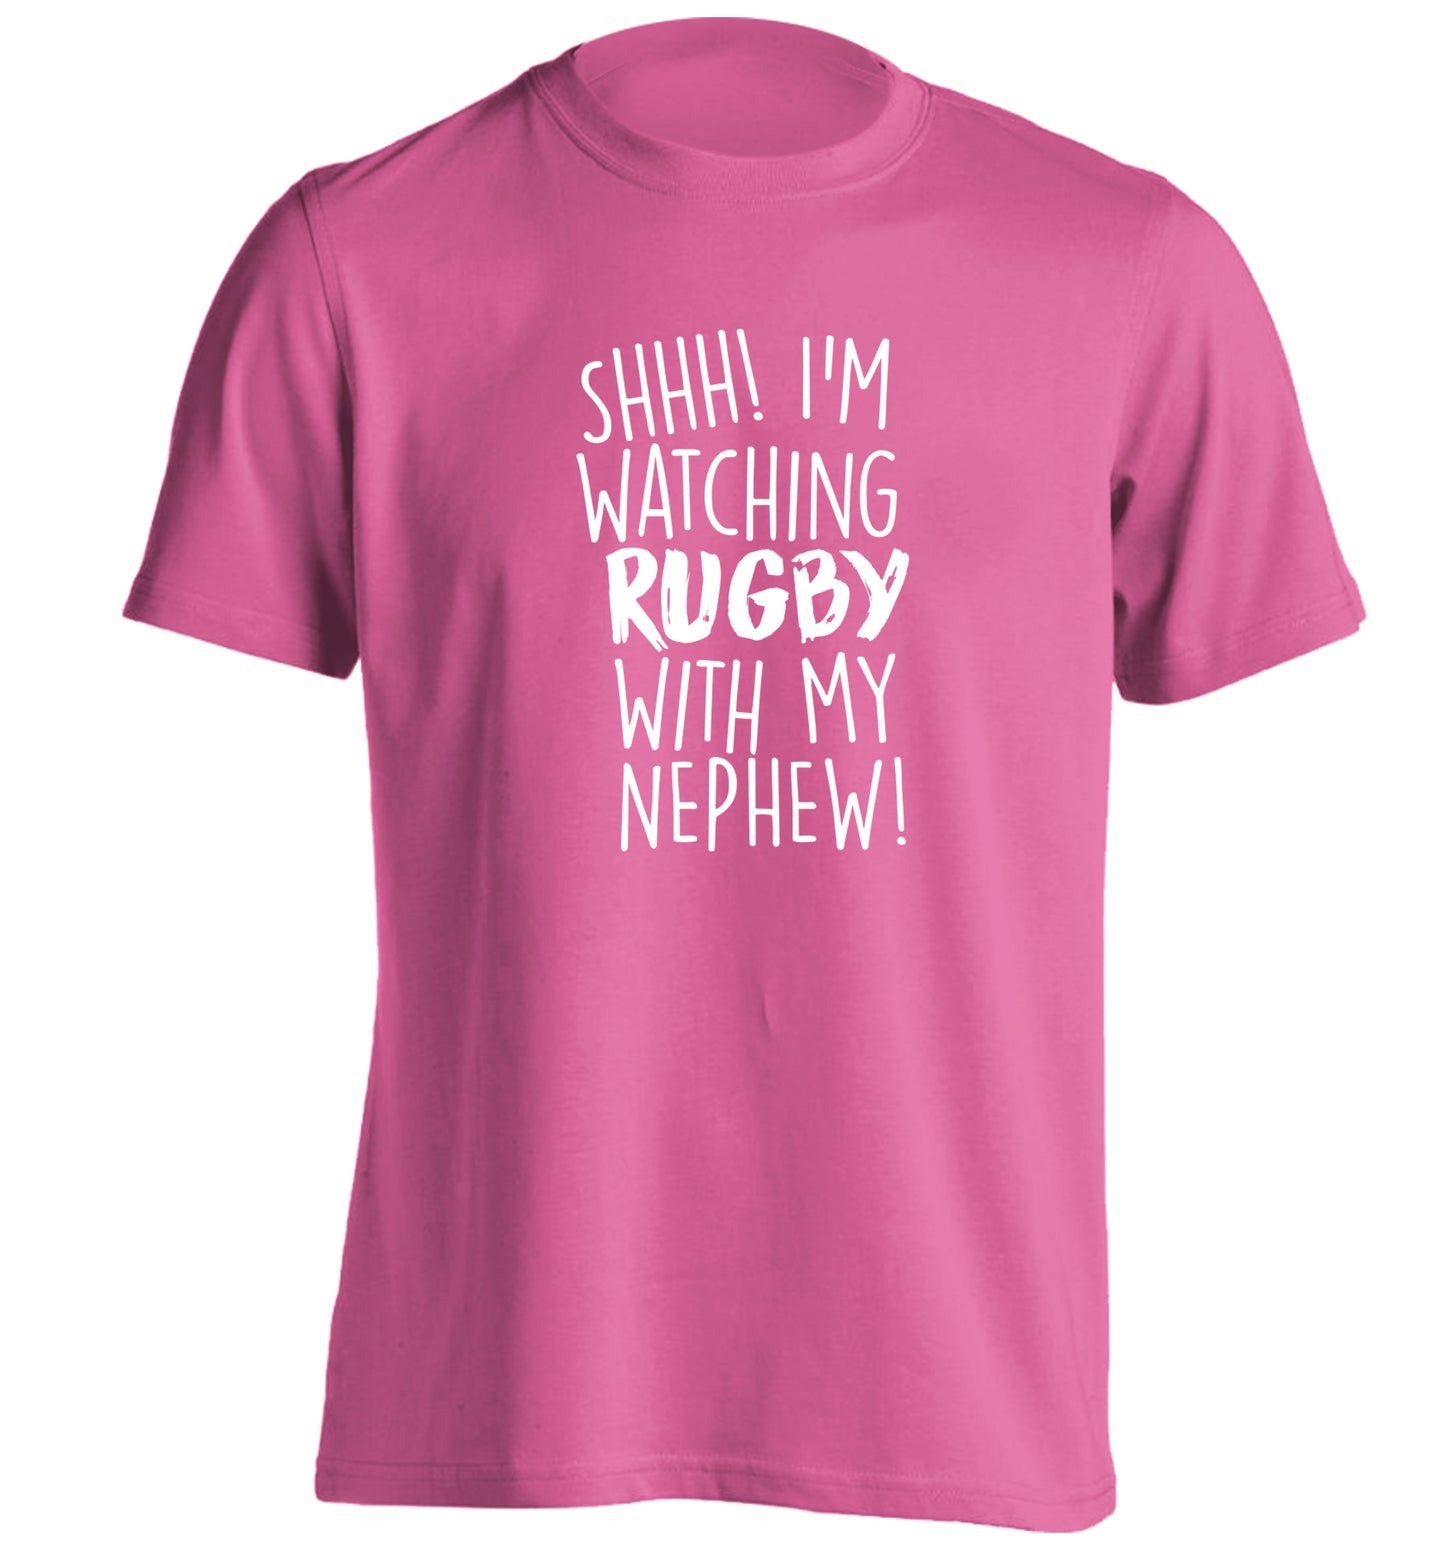 Shh.. I'm watching rugby with my nephew adults unisex pink Tshirt 2XL